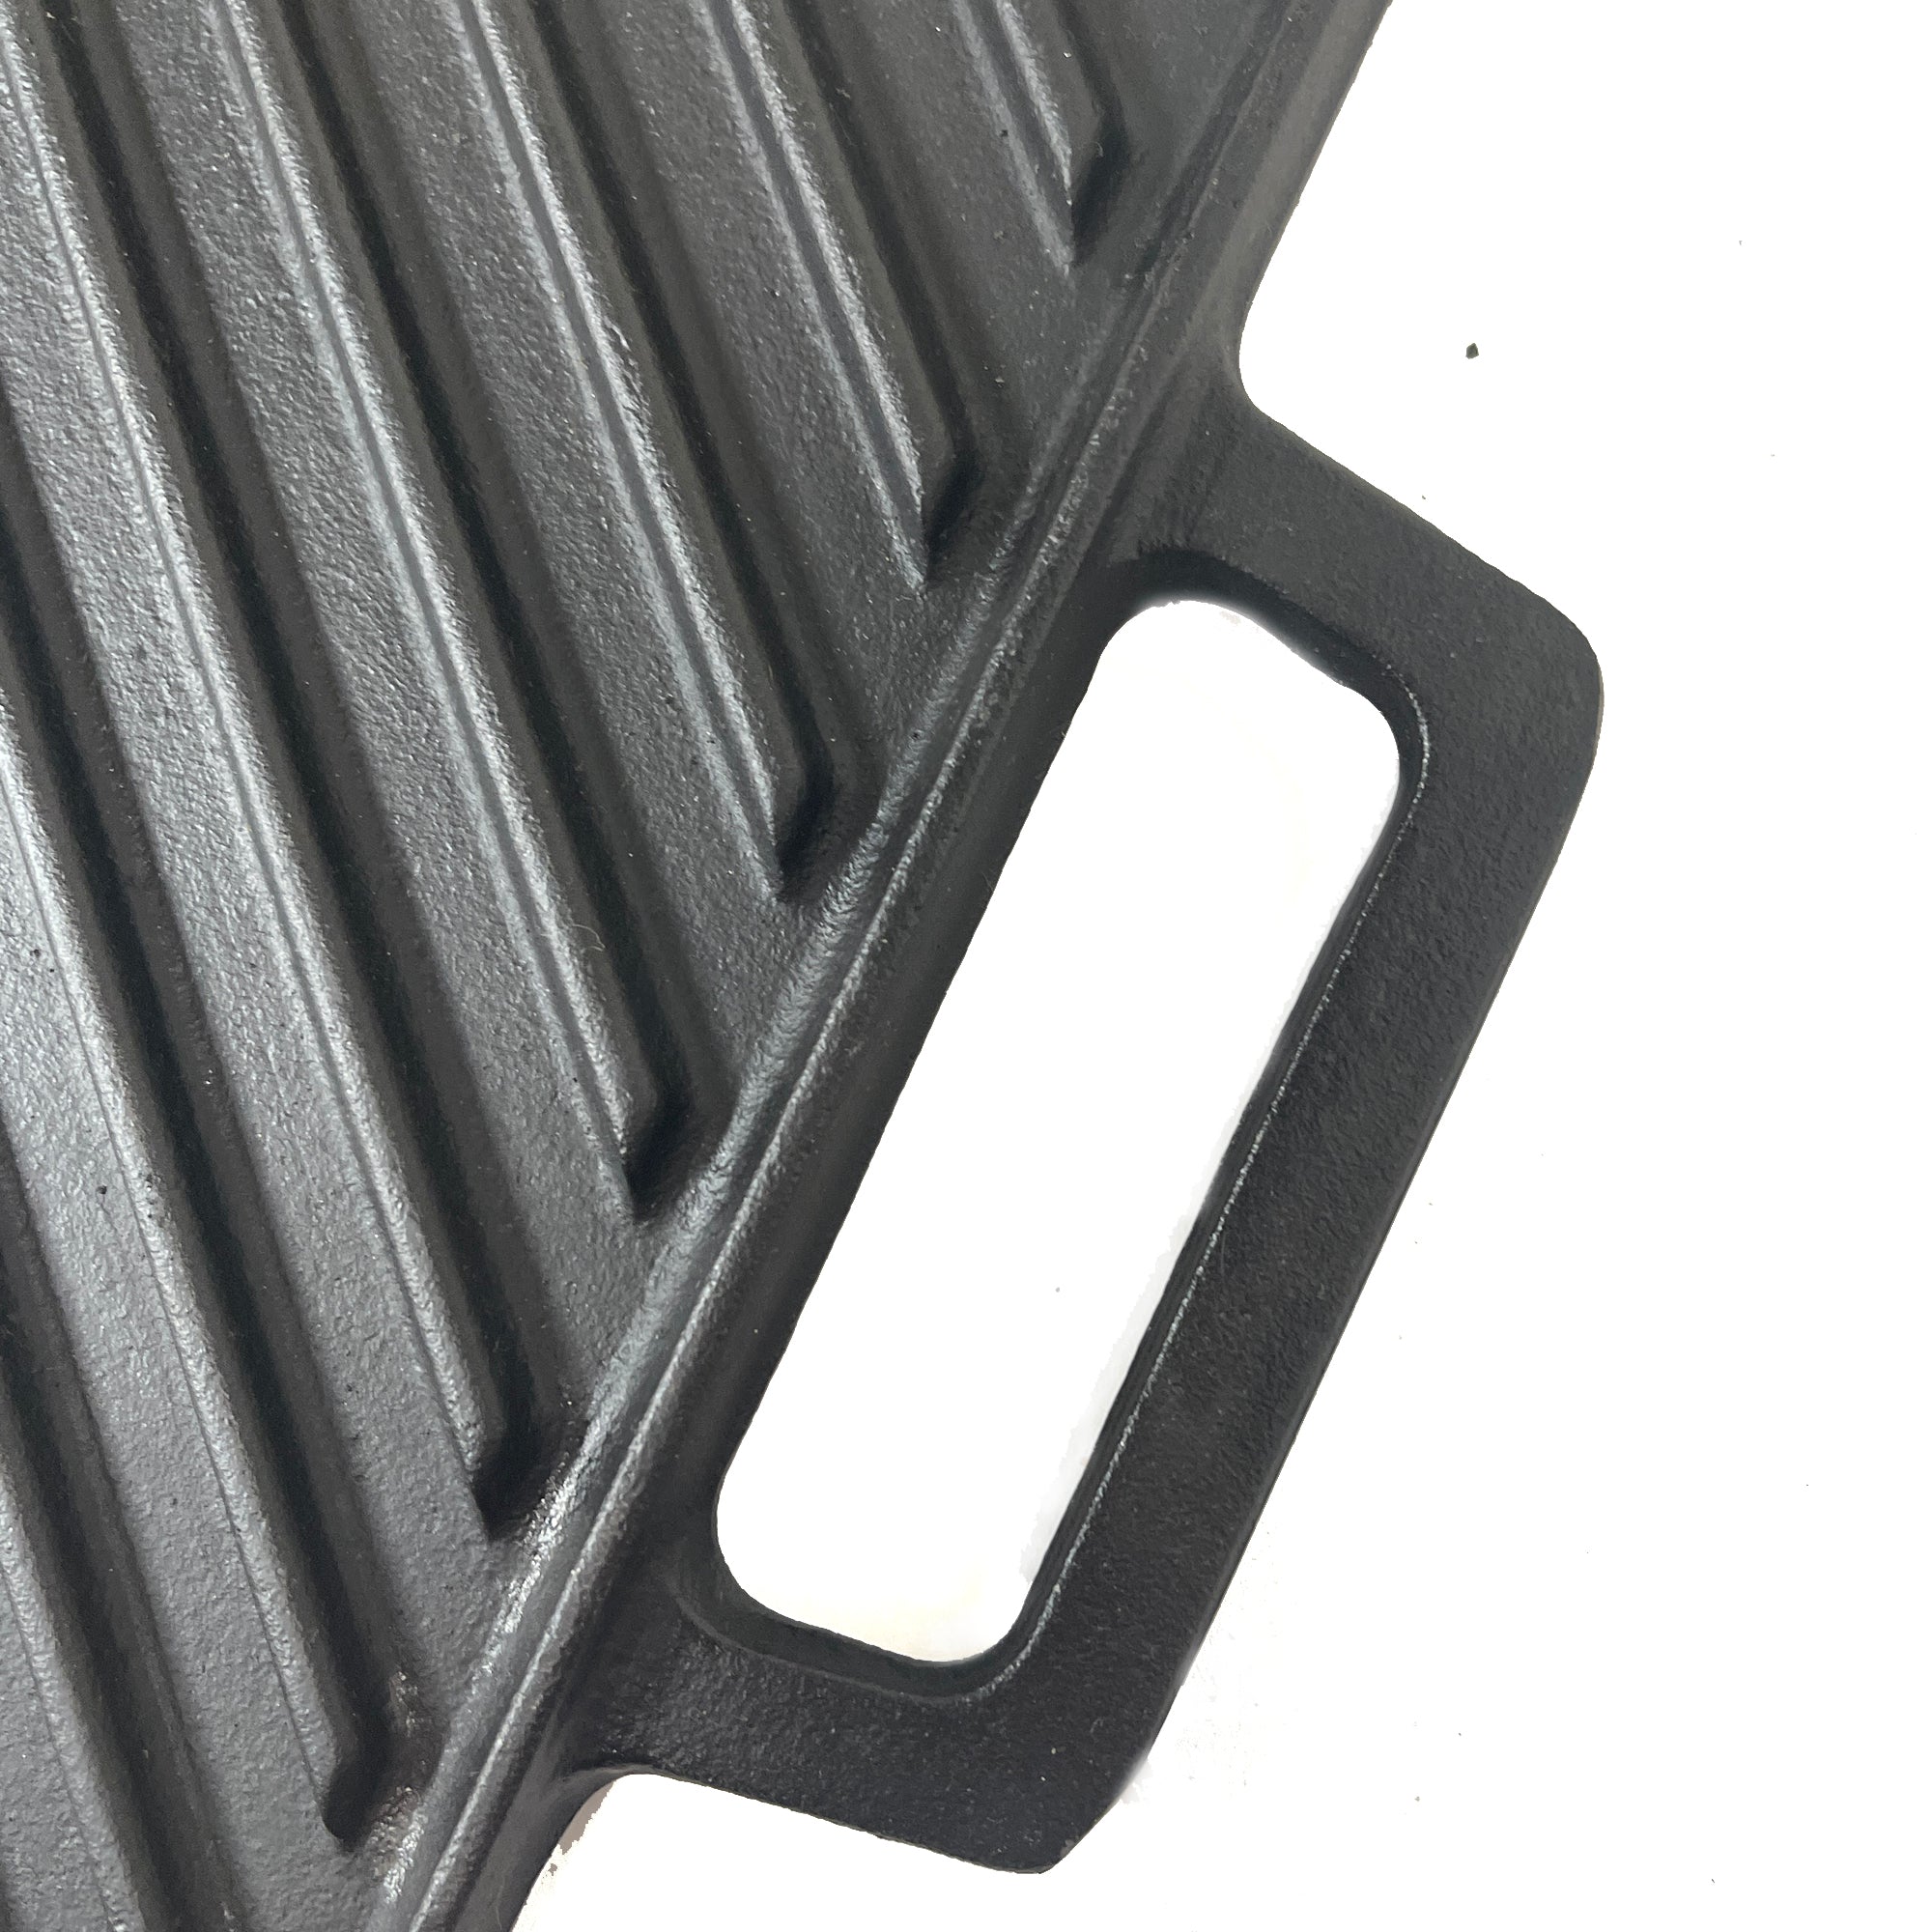 Lodge griddle accessories kit Seasoned Cast Iron Reversible Grill/Griddle